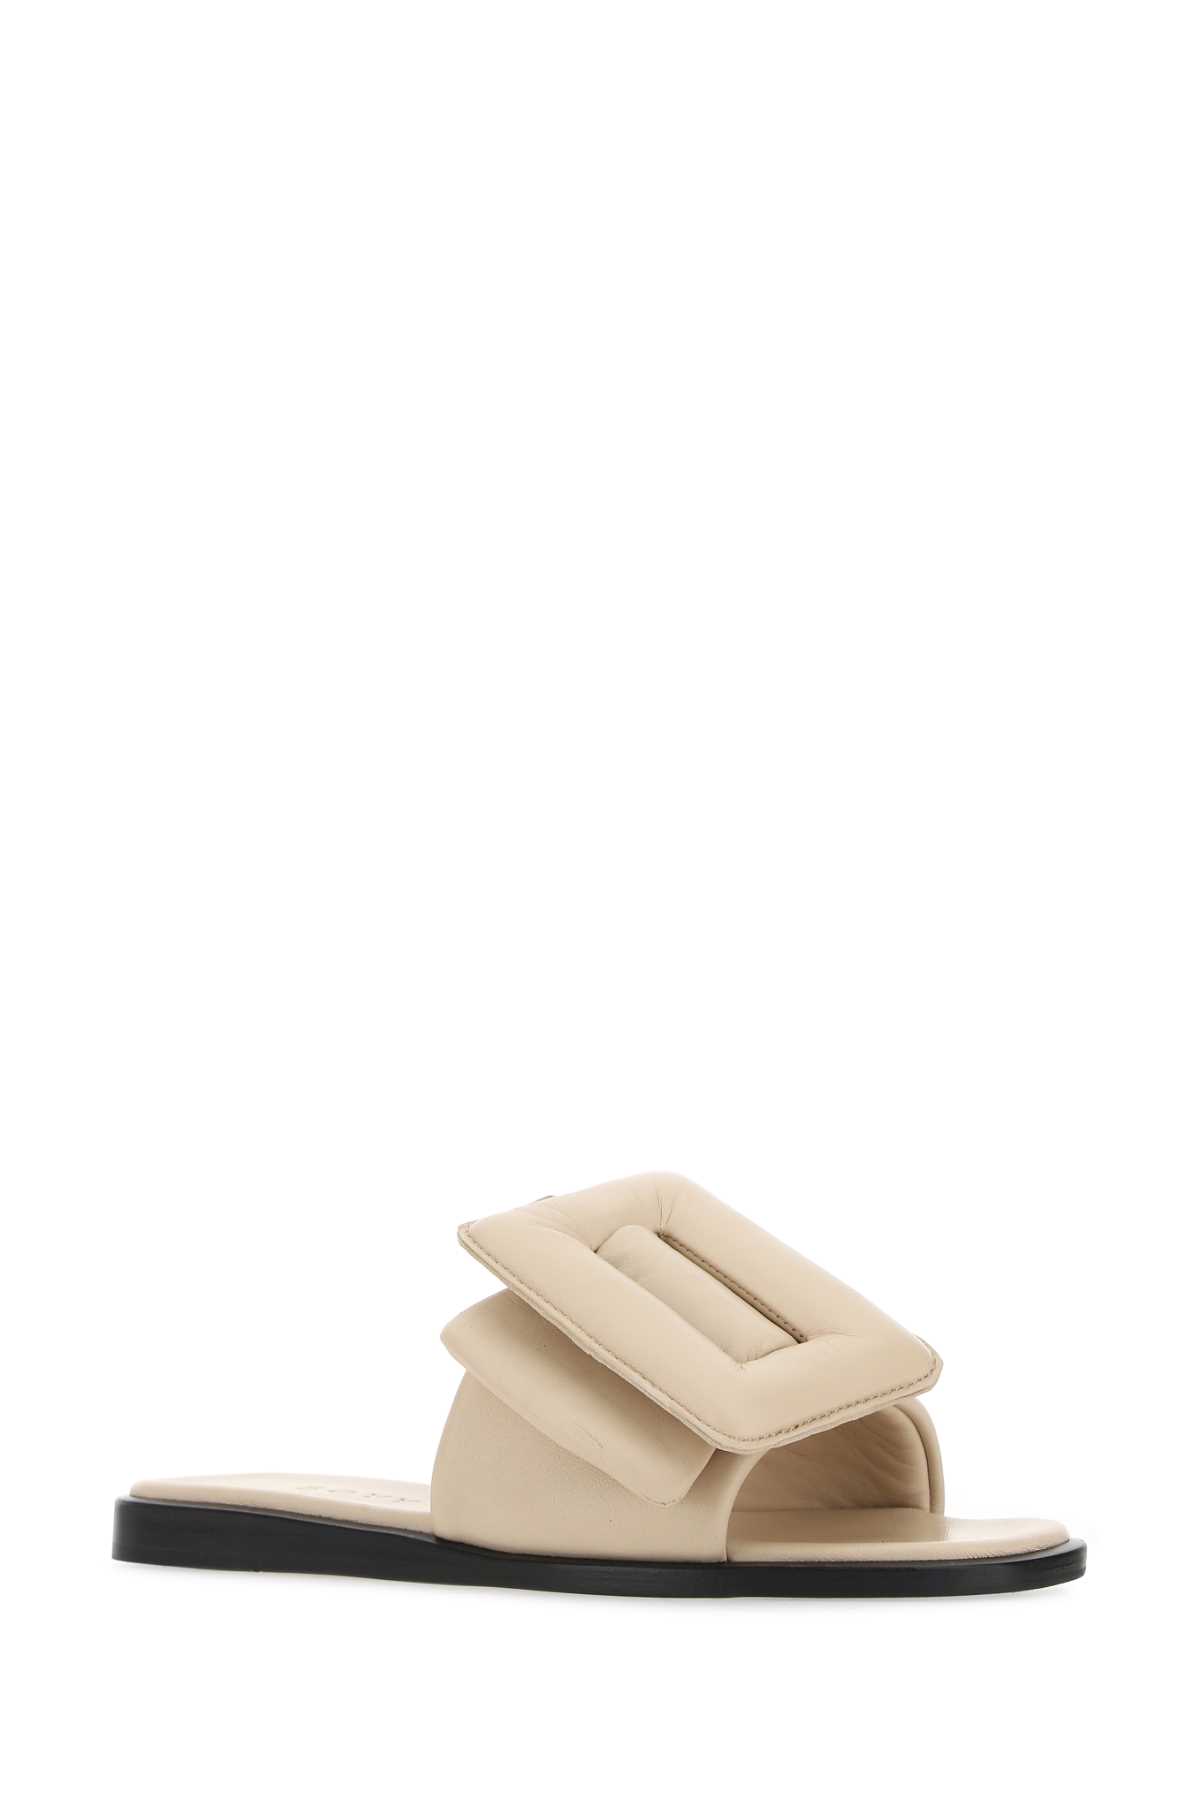 Shop Boyy Sand Leather Puffy Slippers In Ivory